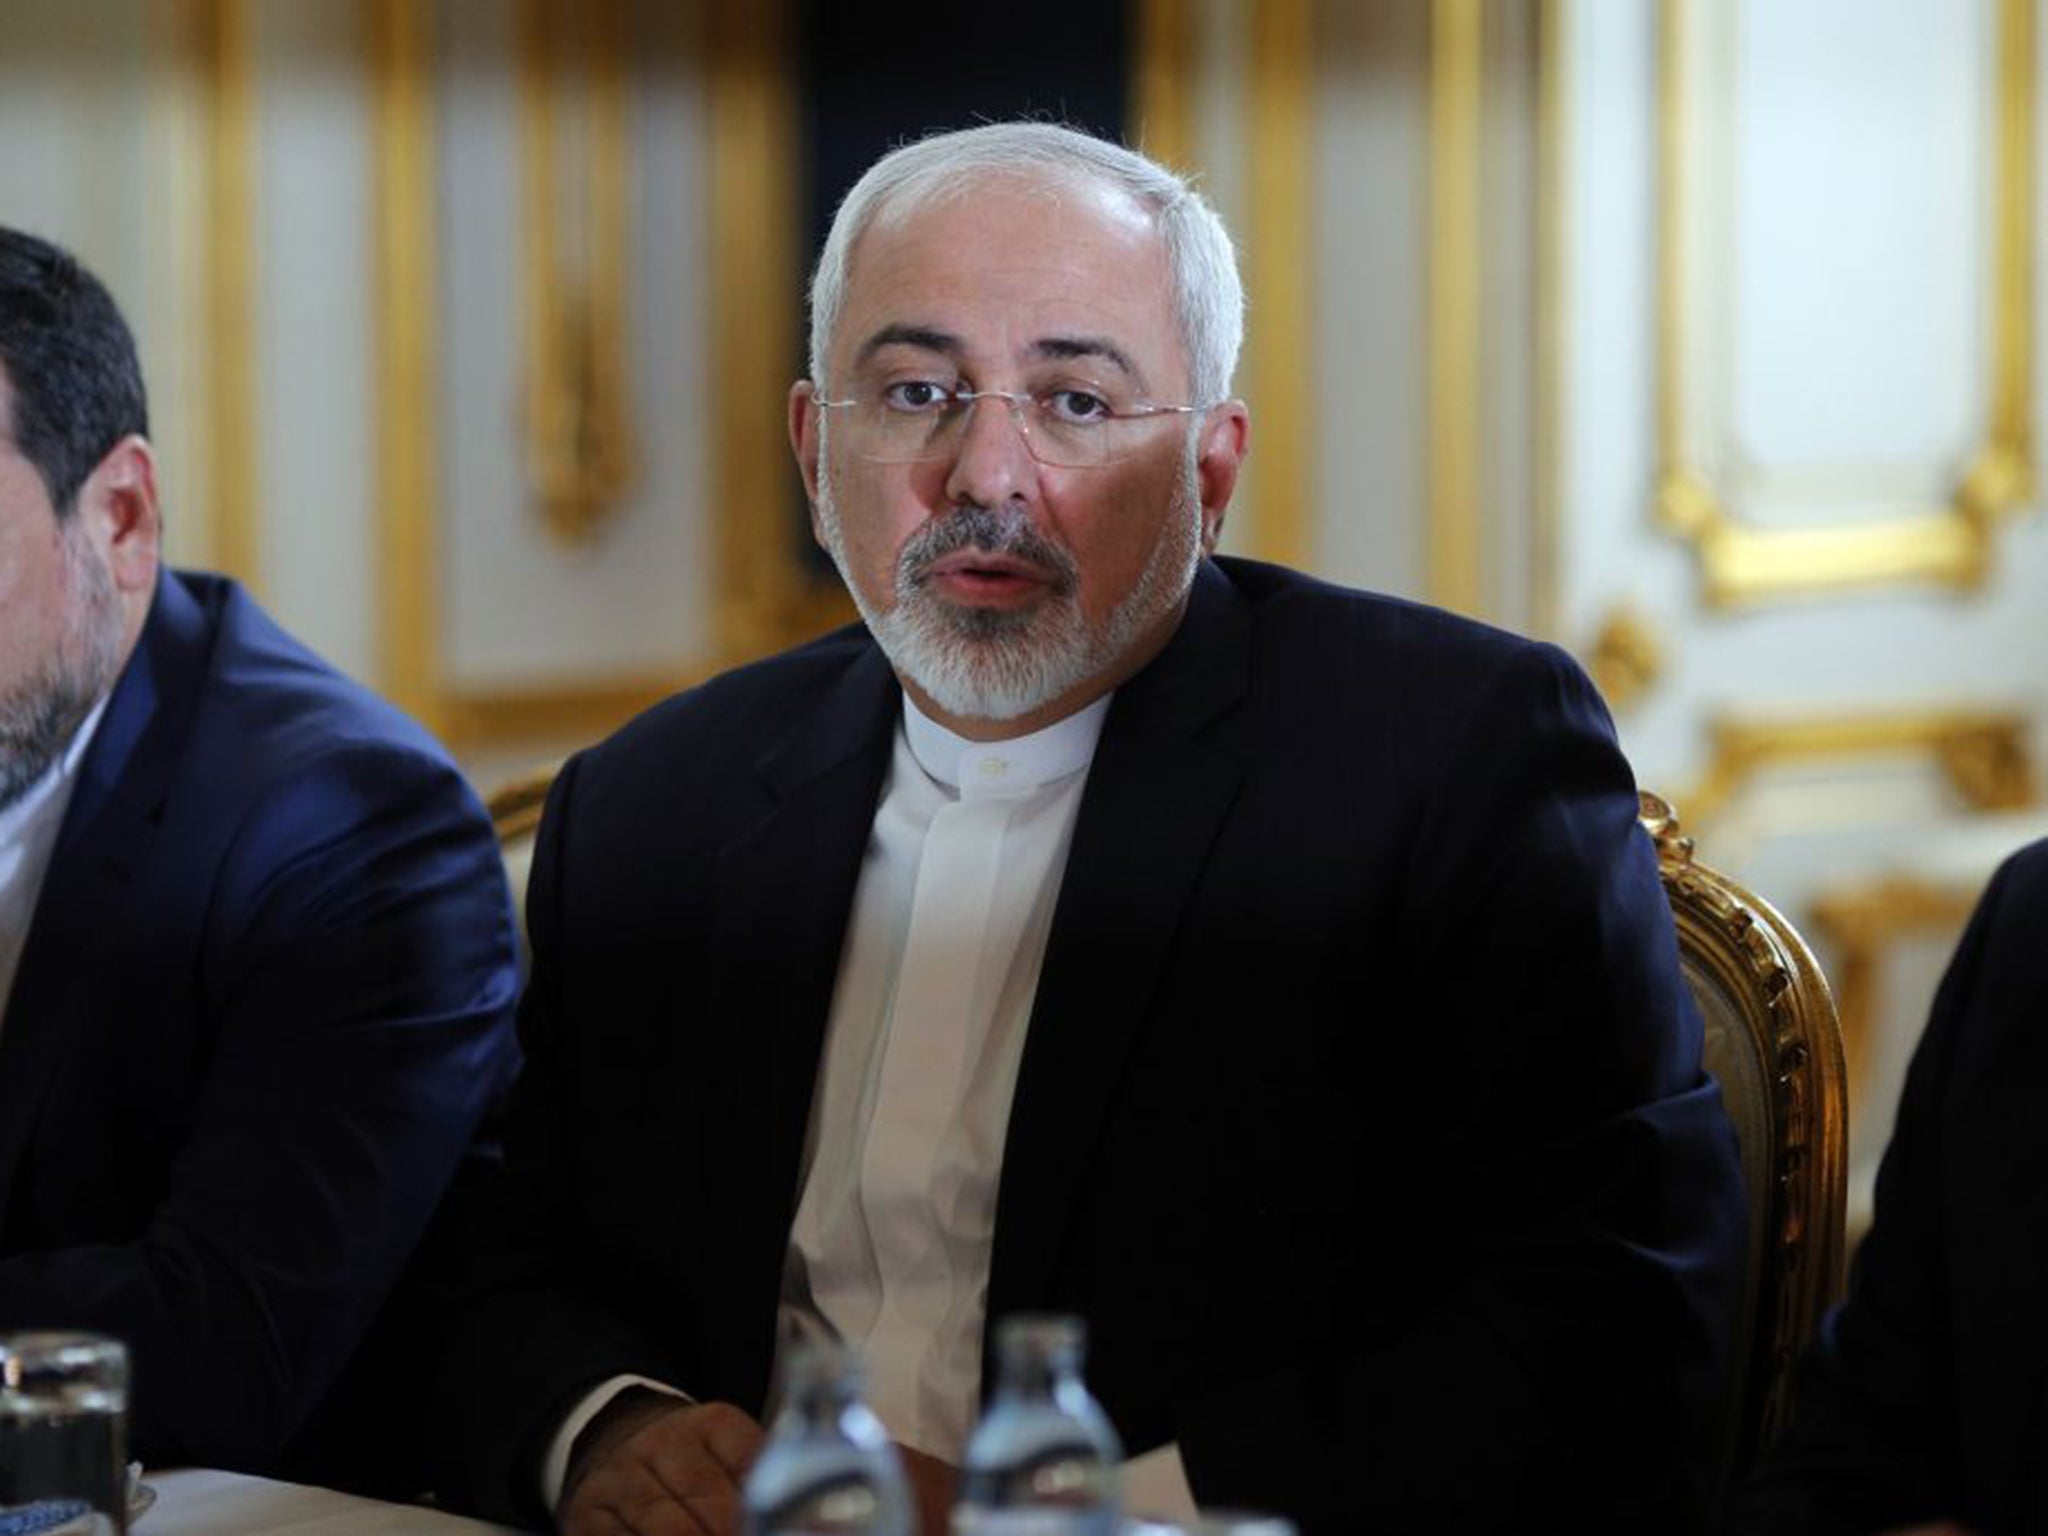 Iran’s Mohammad Javad Zarif has said that Iran would reach a nuclear deal with world powers as long as the other side did not make excessive demands